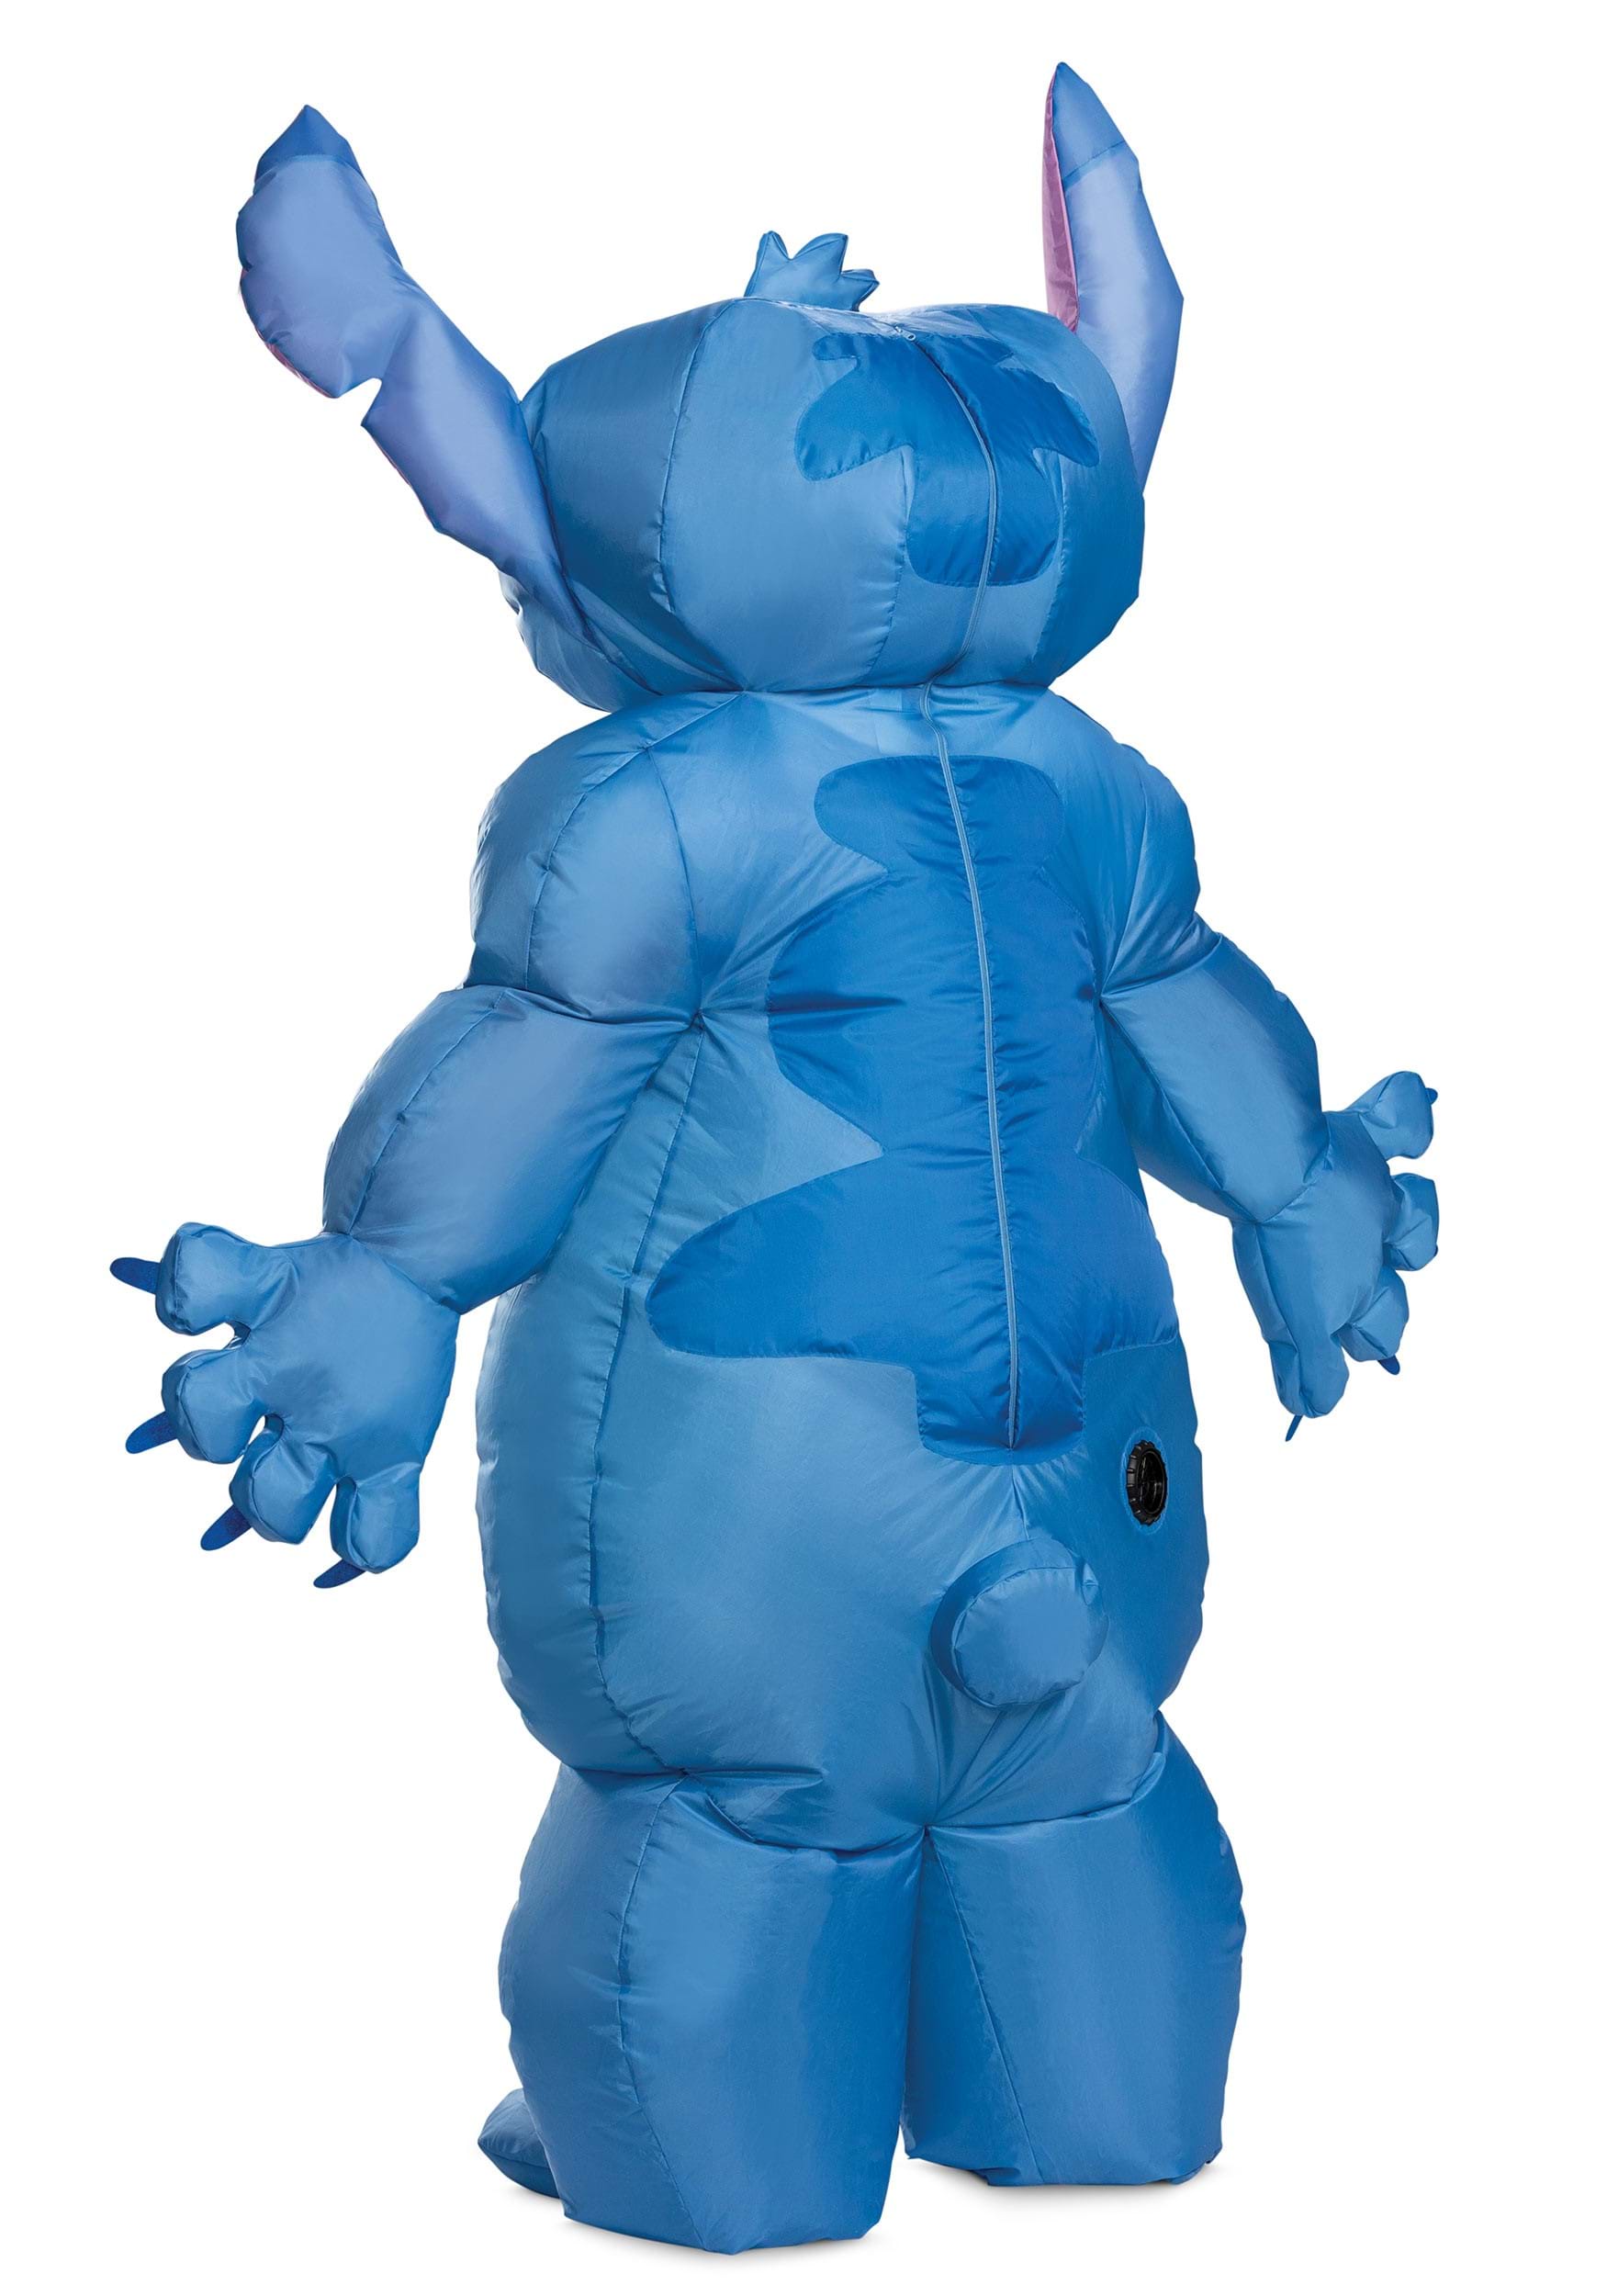 Stitch, Costumes, Toys, Clothing, Accessories & More